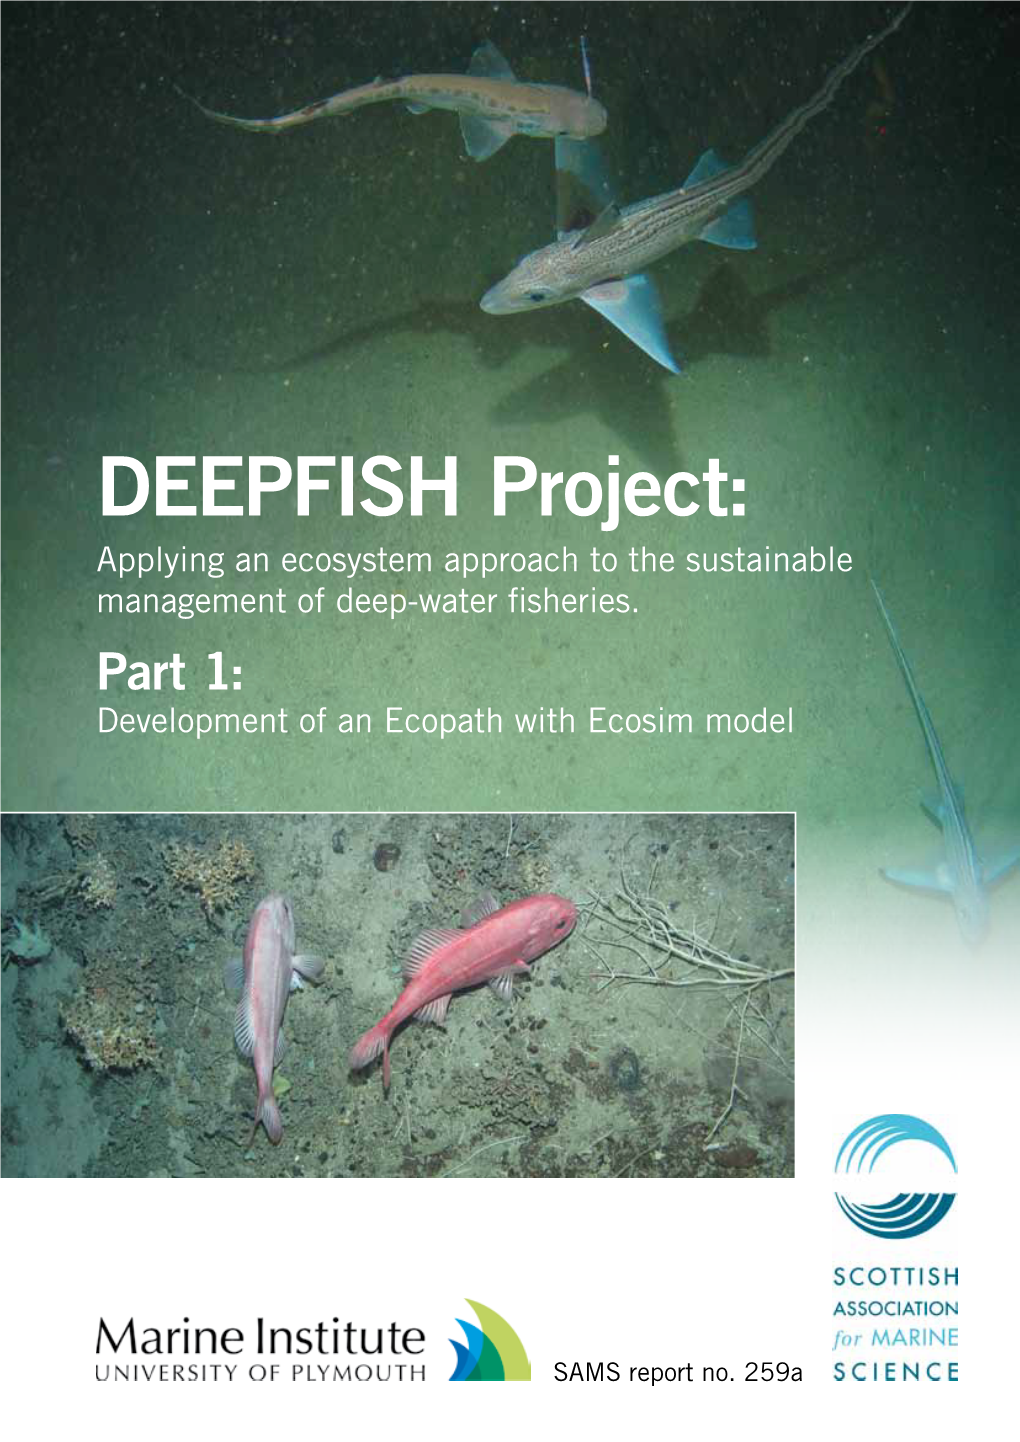 DEEPFISH Project: Applying an Ecosystem Approach to the Sustainable Management of Deep-Water Fisheries